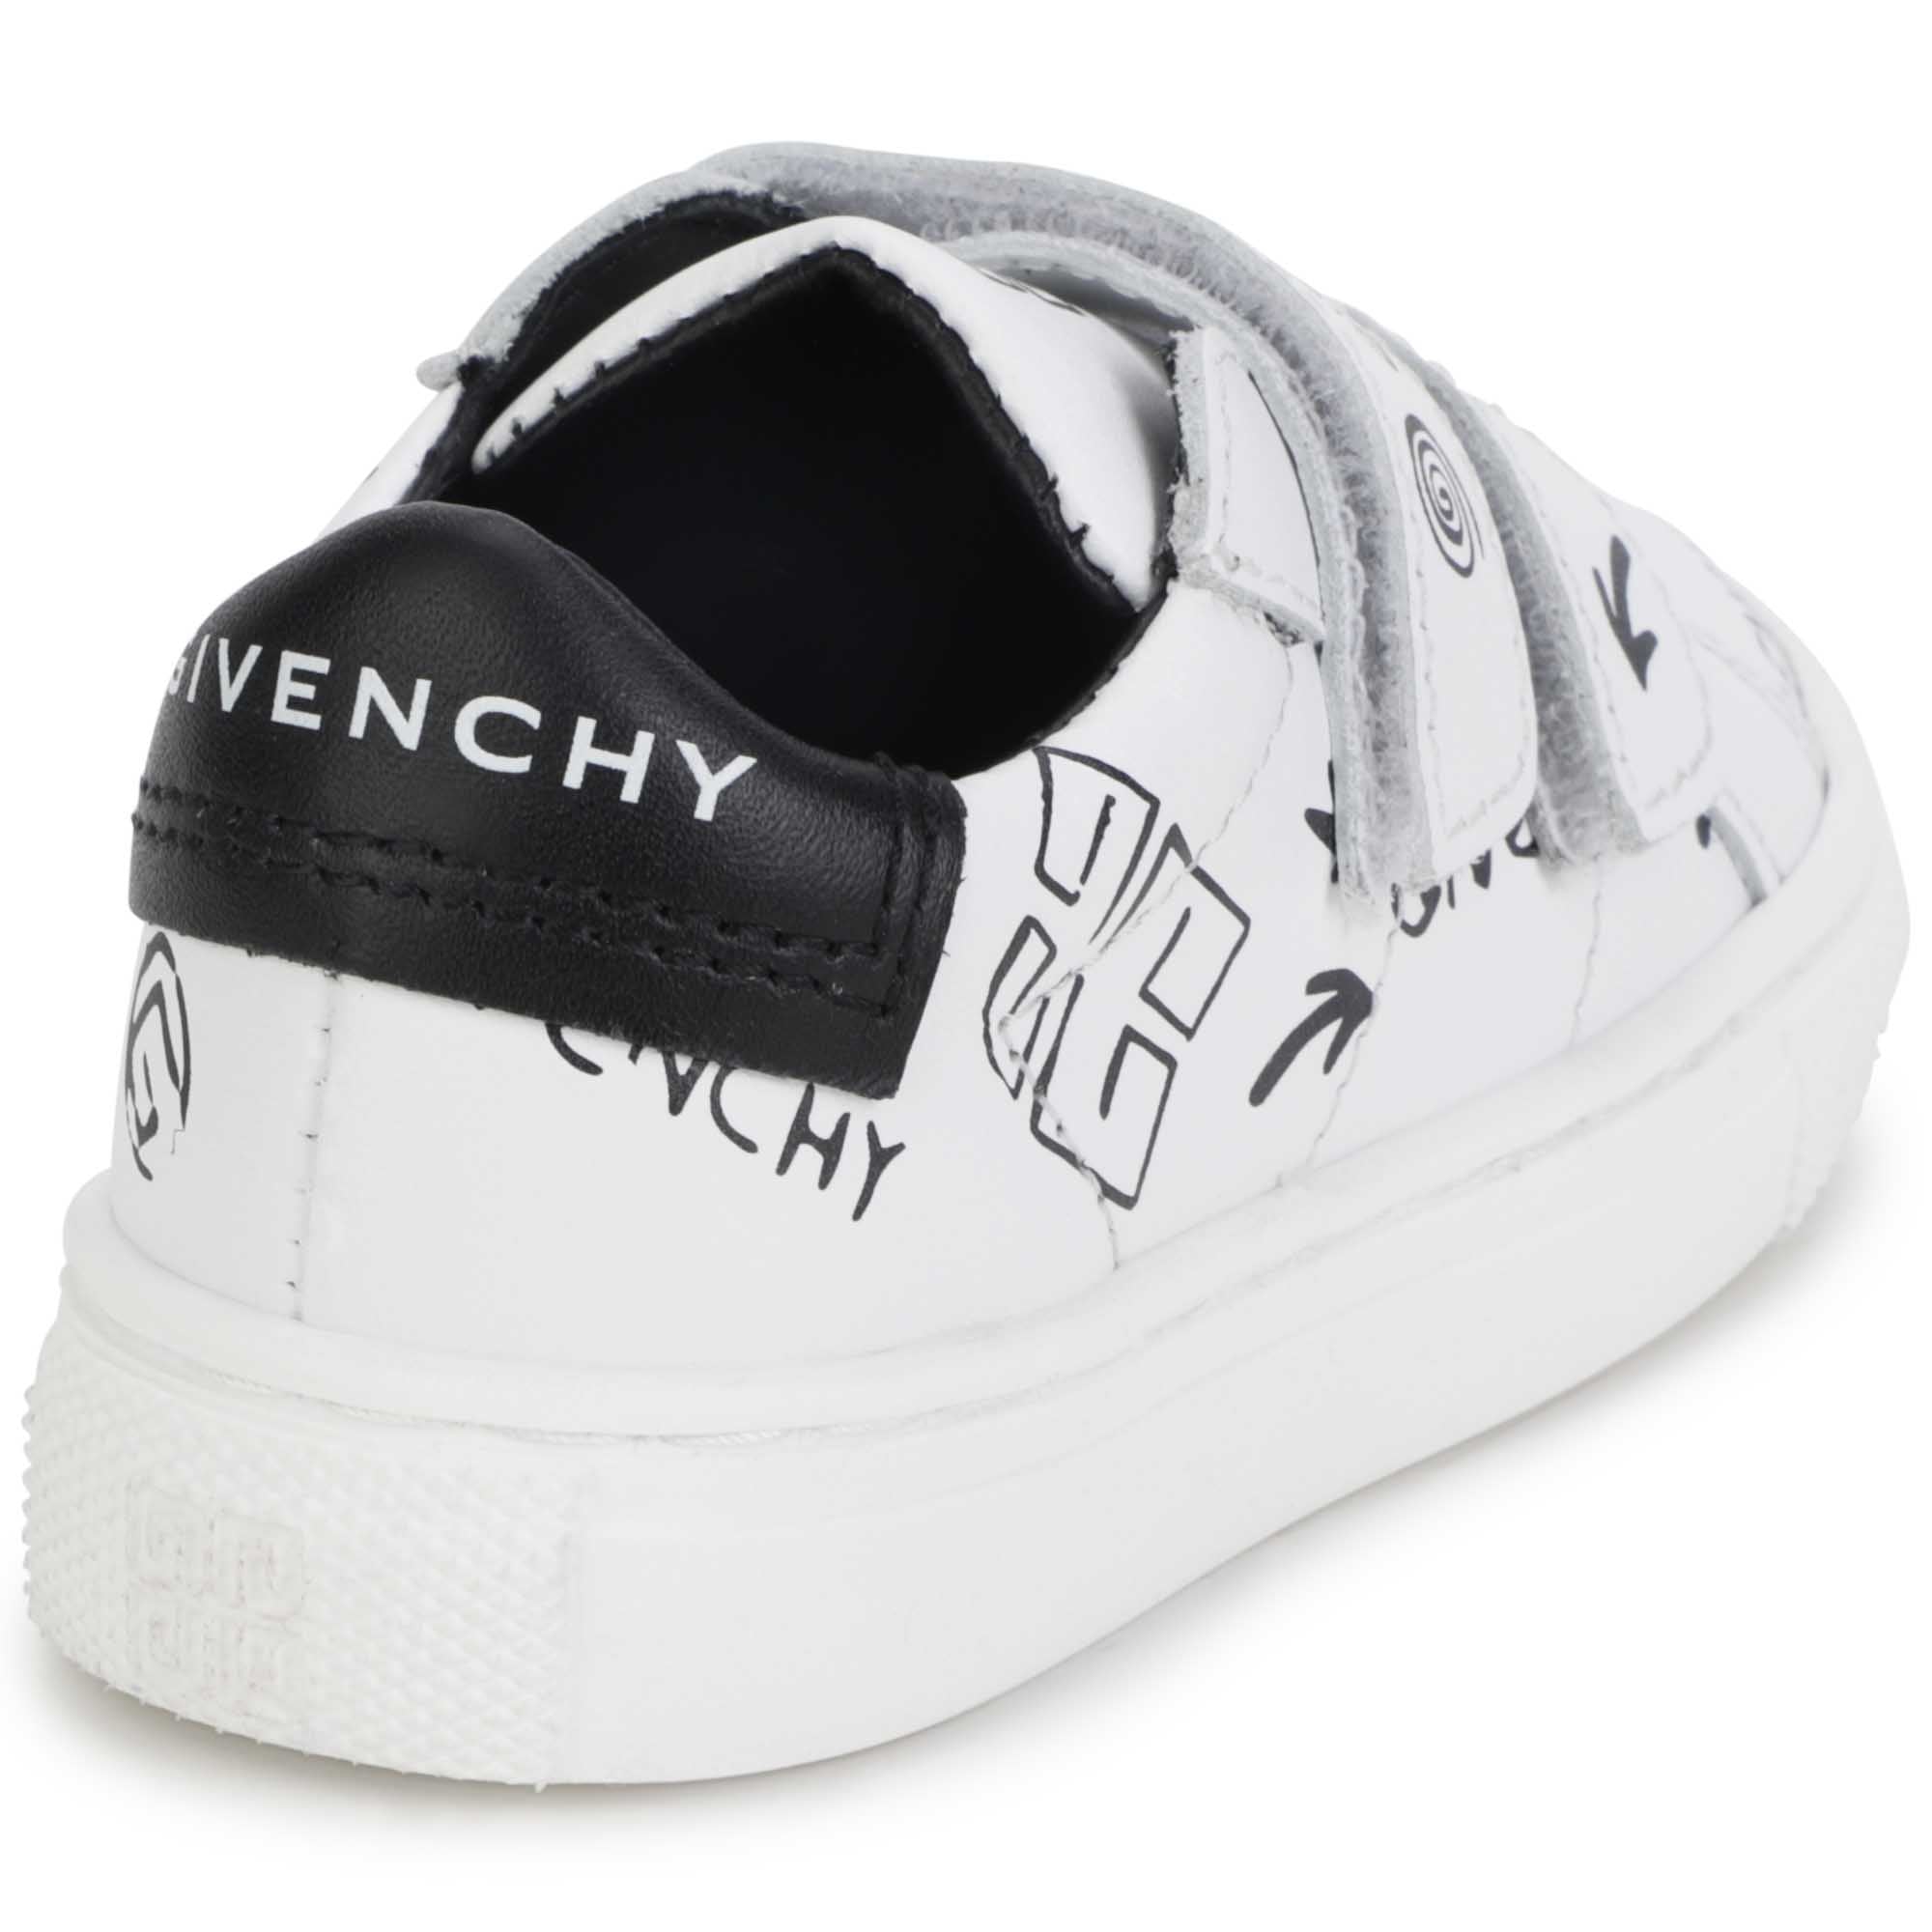 Givenchy Baby Graffiti Sneakers